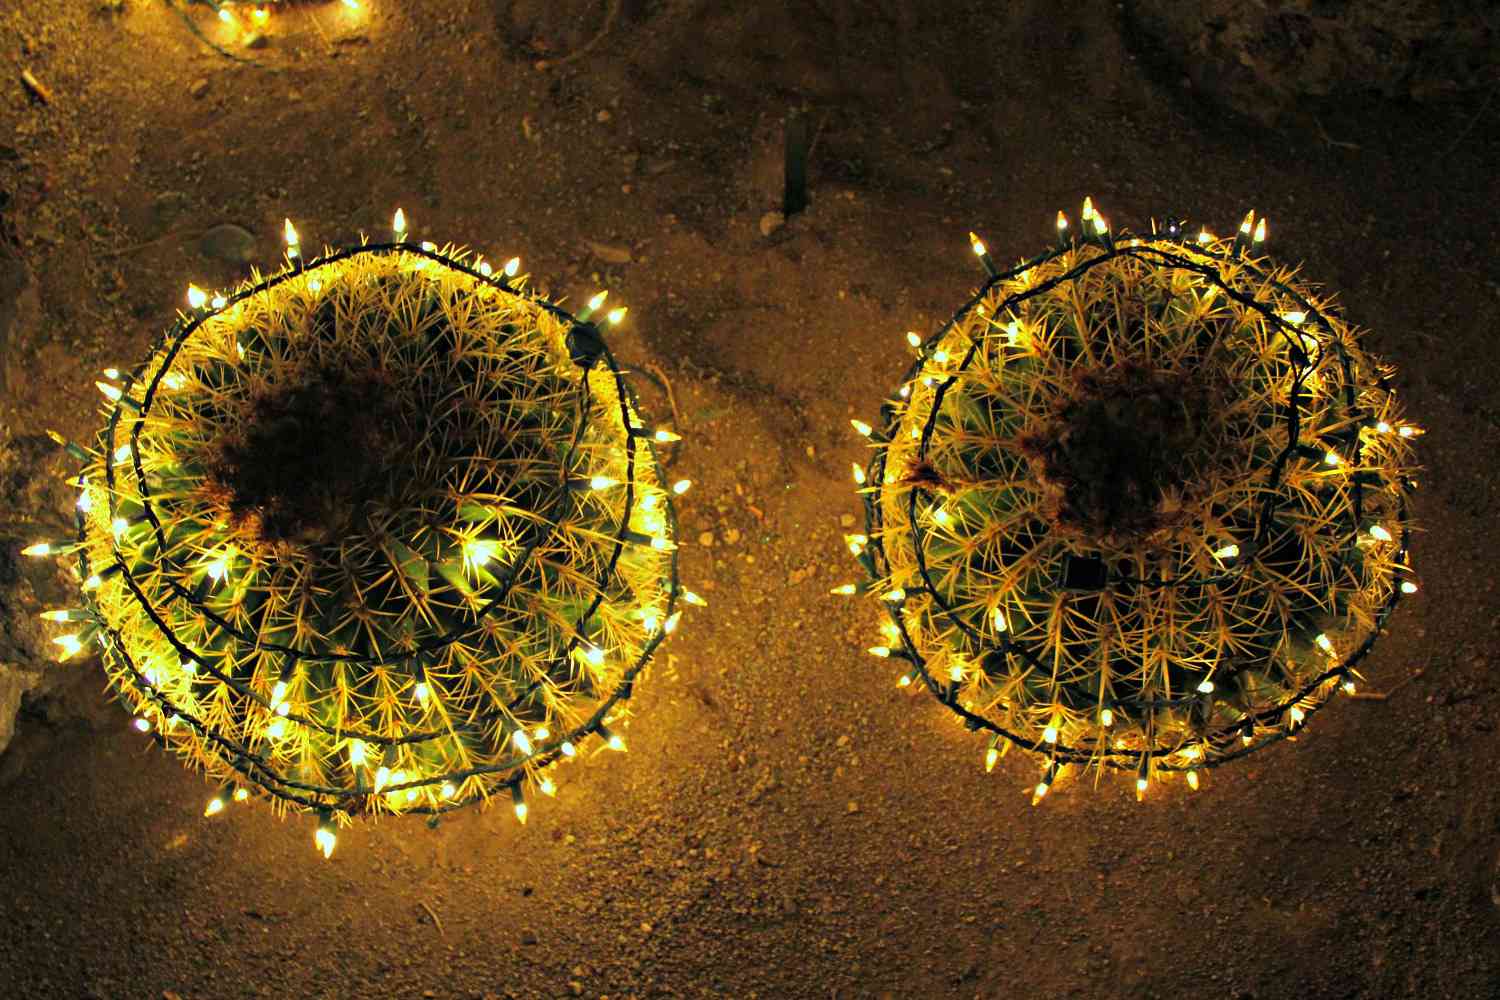 Golden barrel cacti are decorated with string lights.